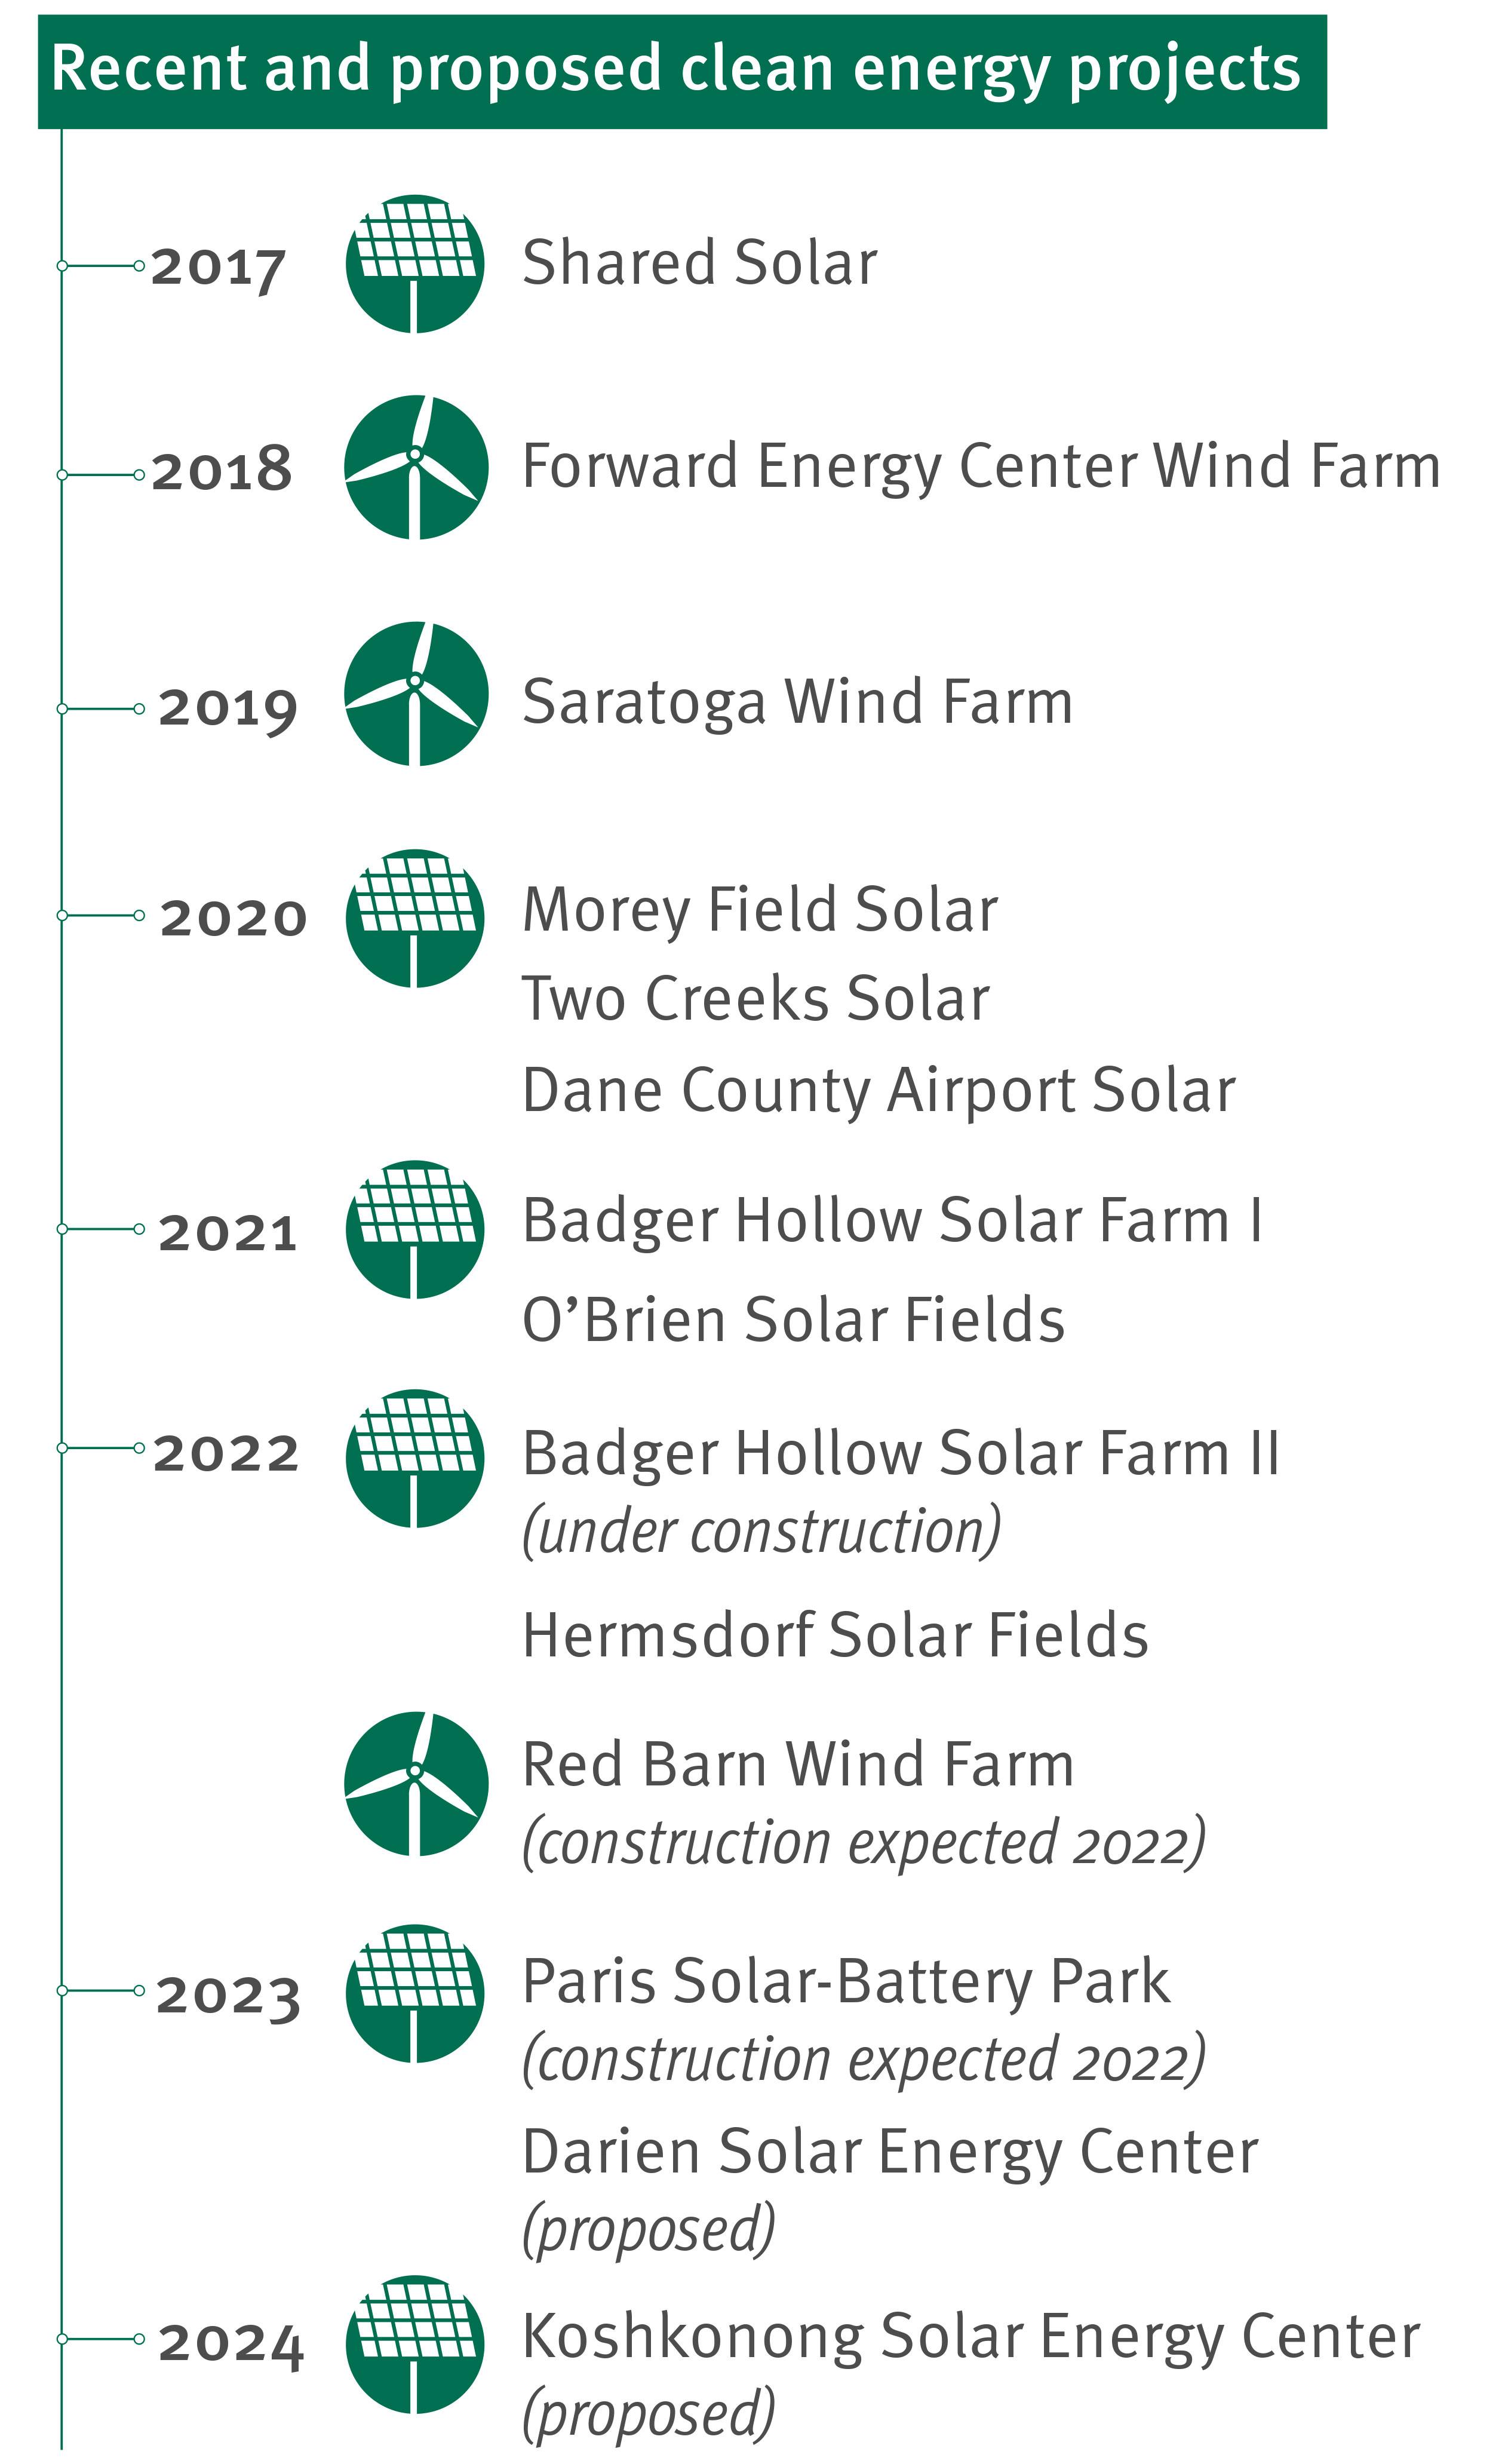 Recent and proposed clean energy projects